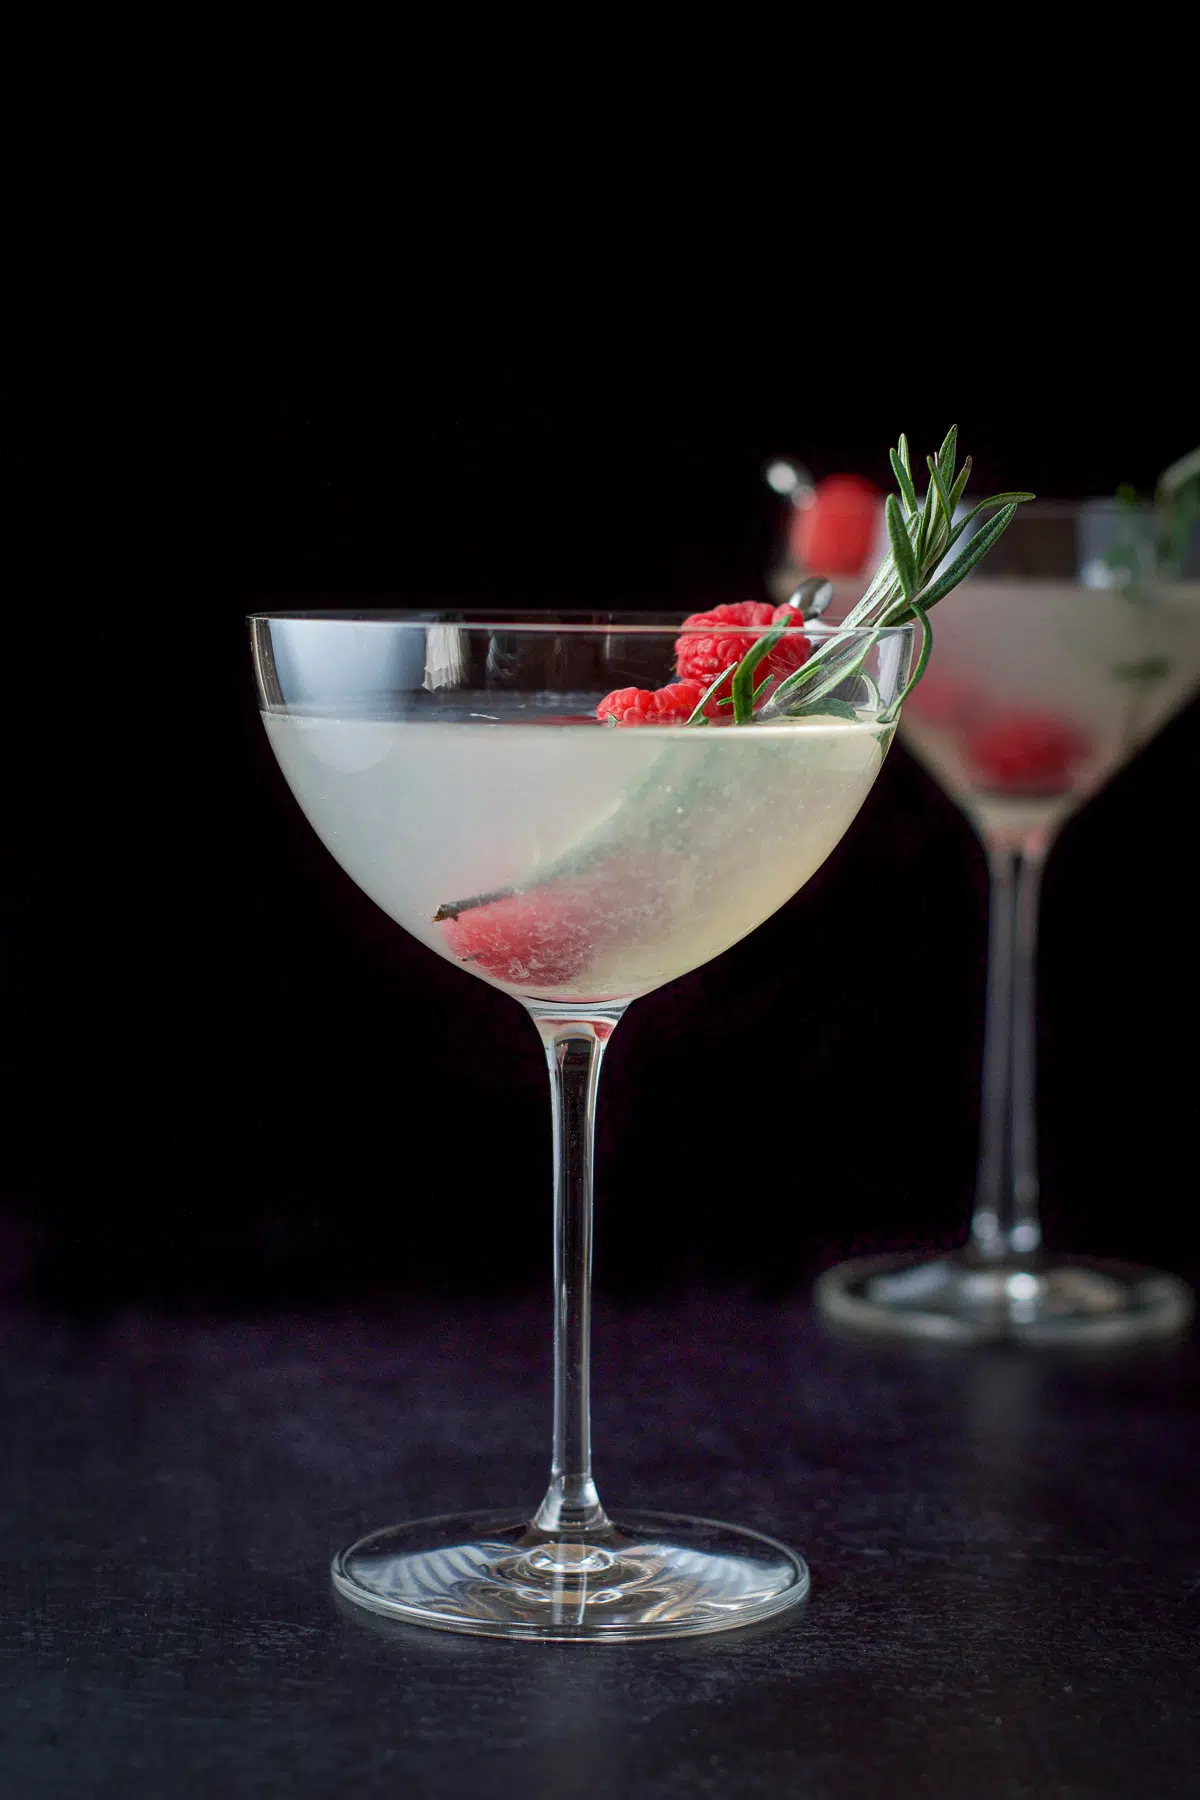 Vertical view of the martinis with raspberries and rosemary in as garnish